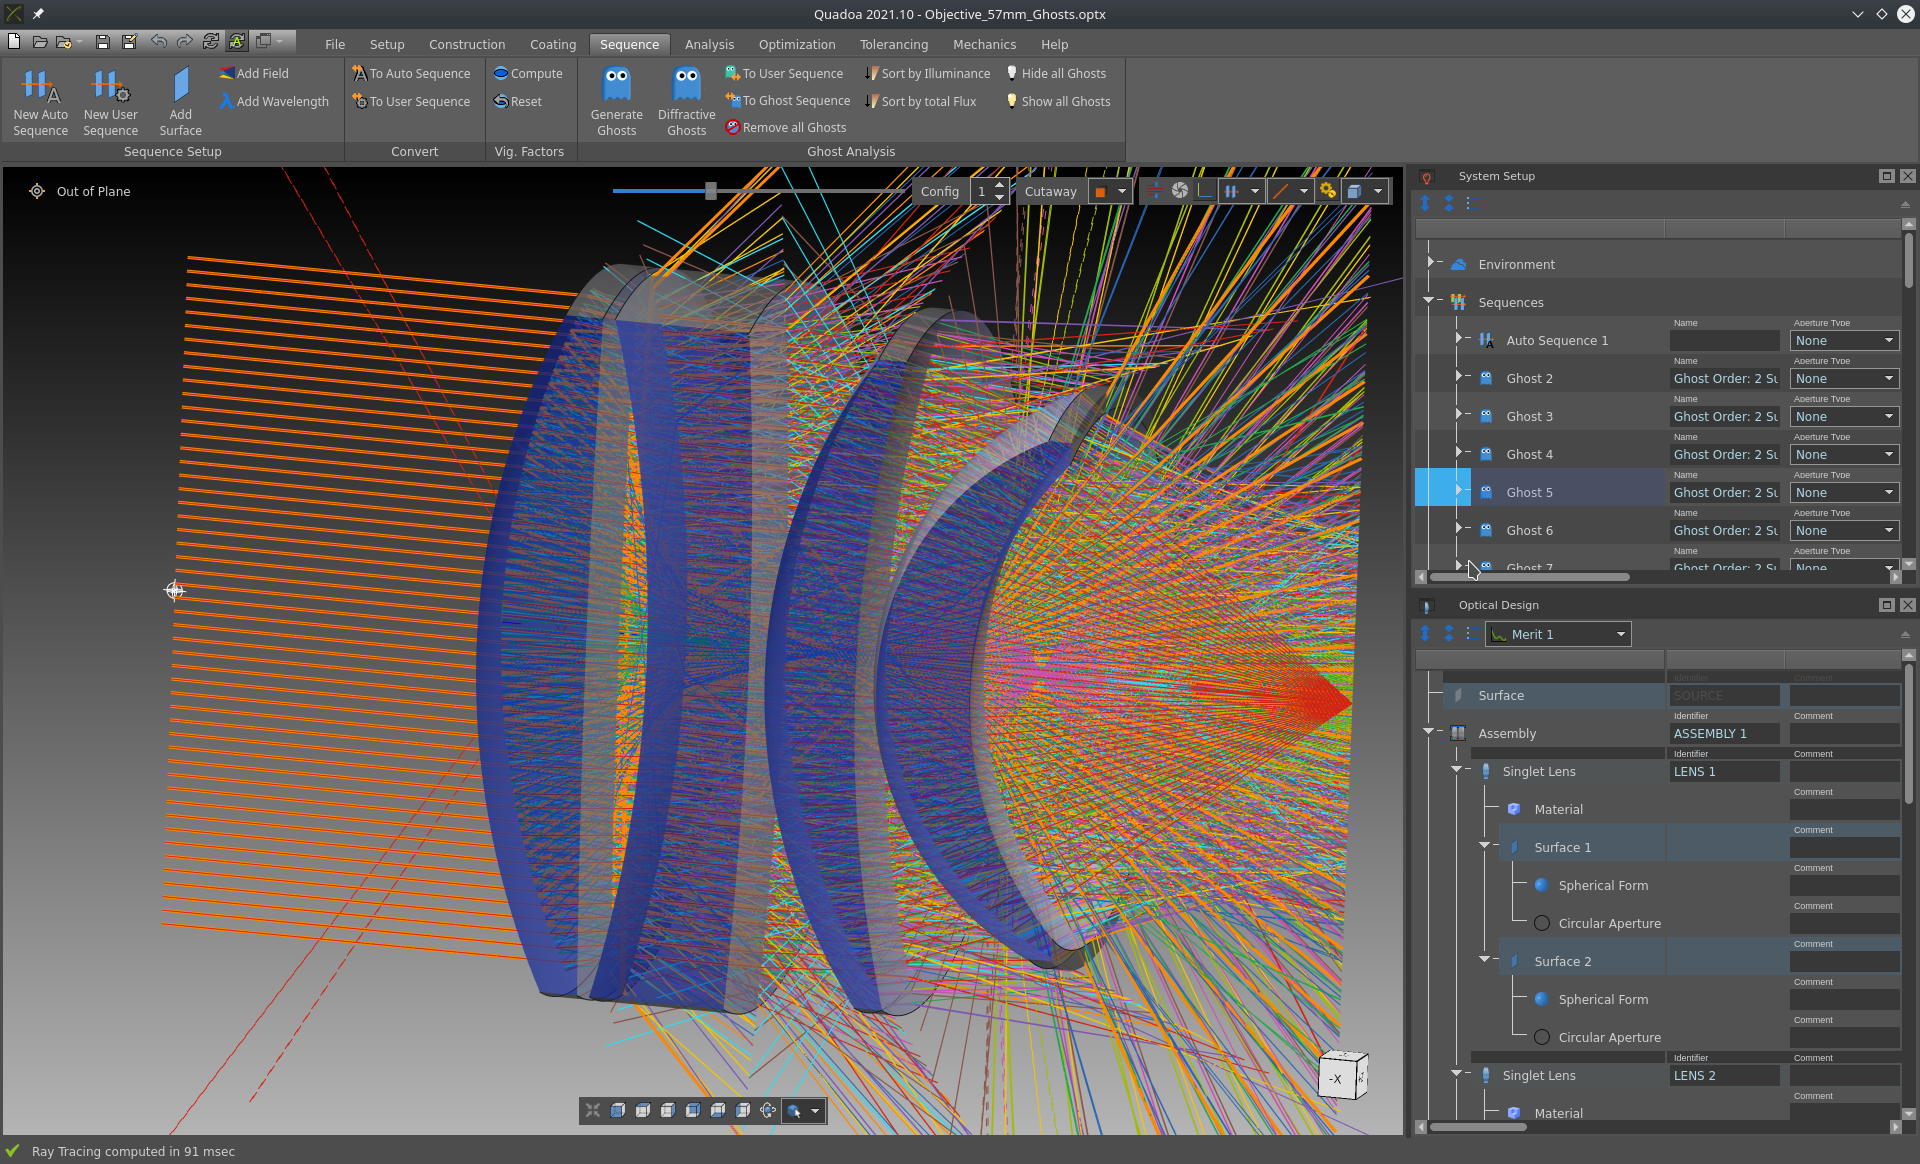 Integrated live ghost analyzer in the optical design software Quadoa Optical CAD